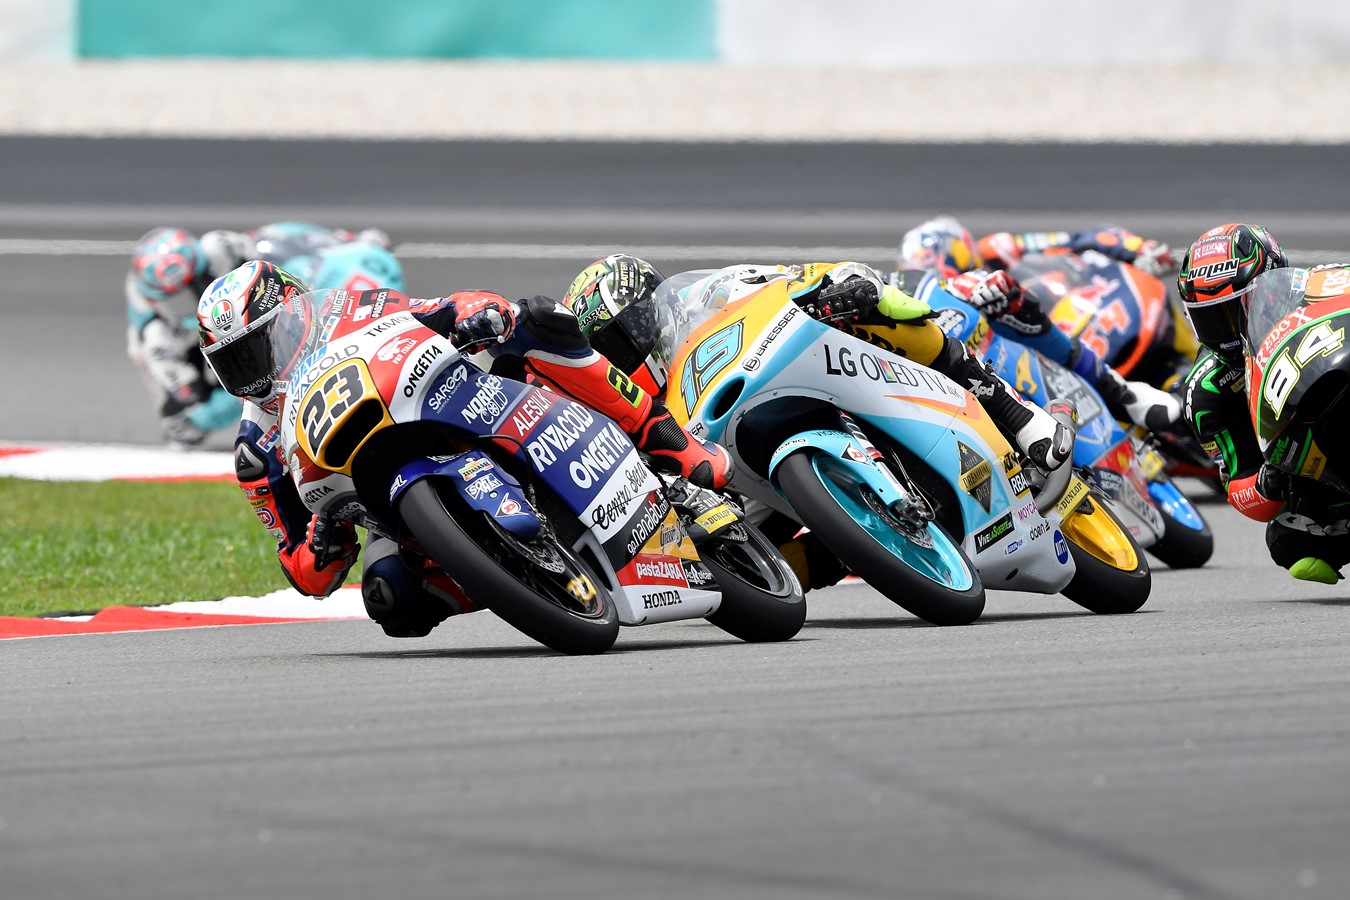 Kornfeil with an excellent second-place finish in a frantic Moto3 encounter